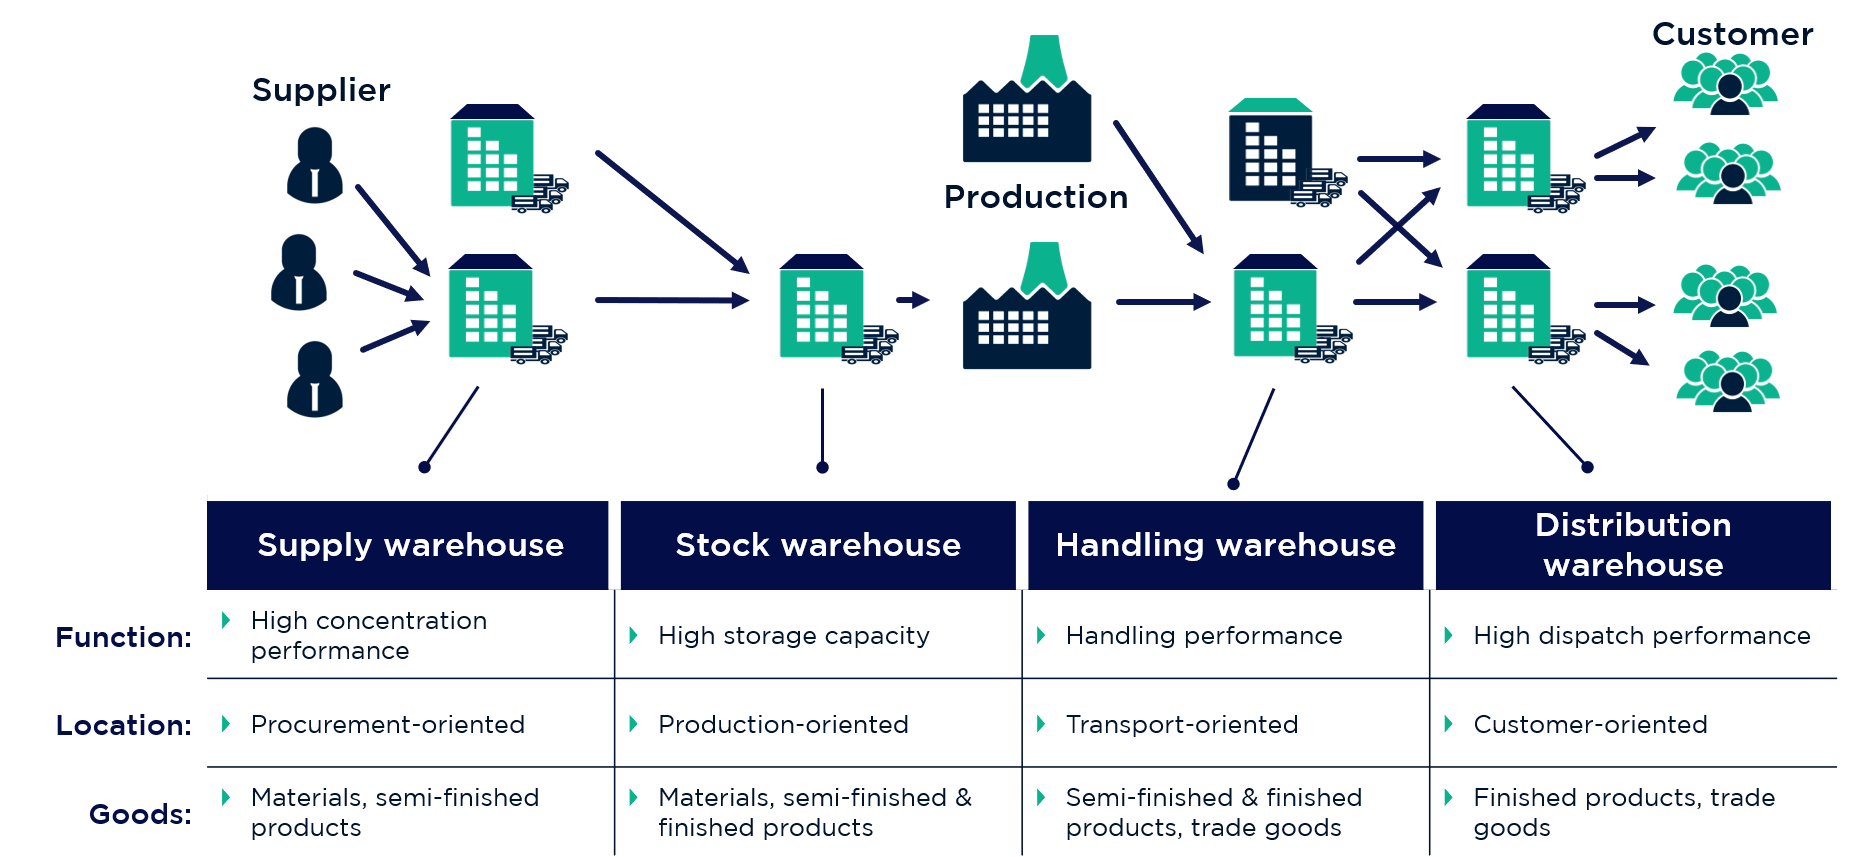 Different warehouse types along the supply chain